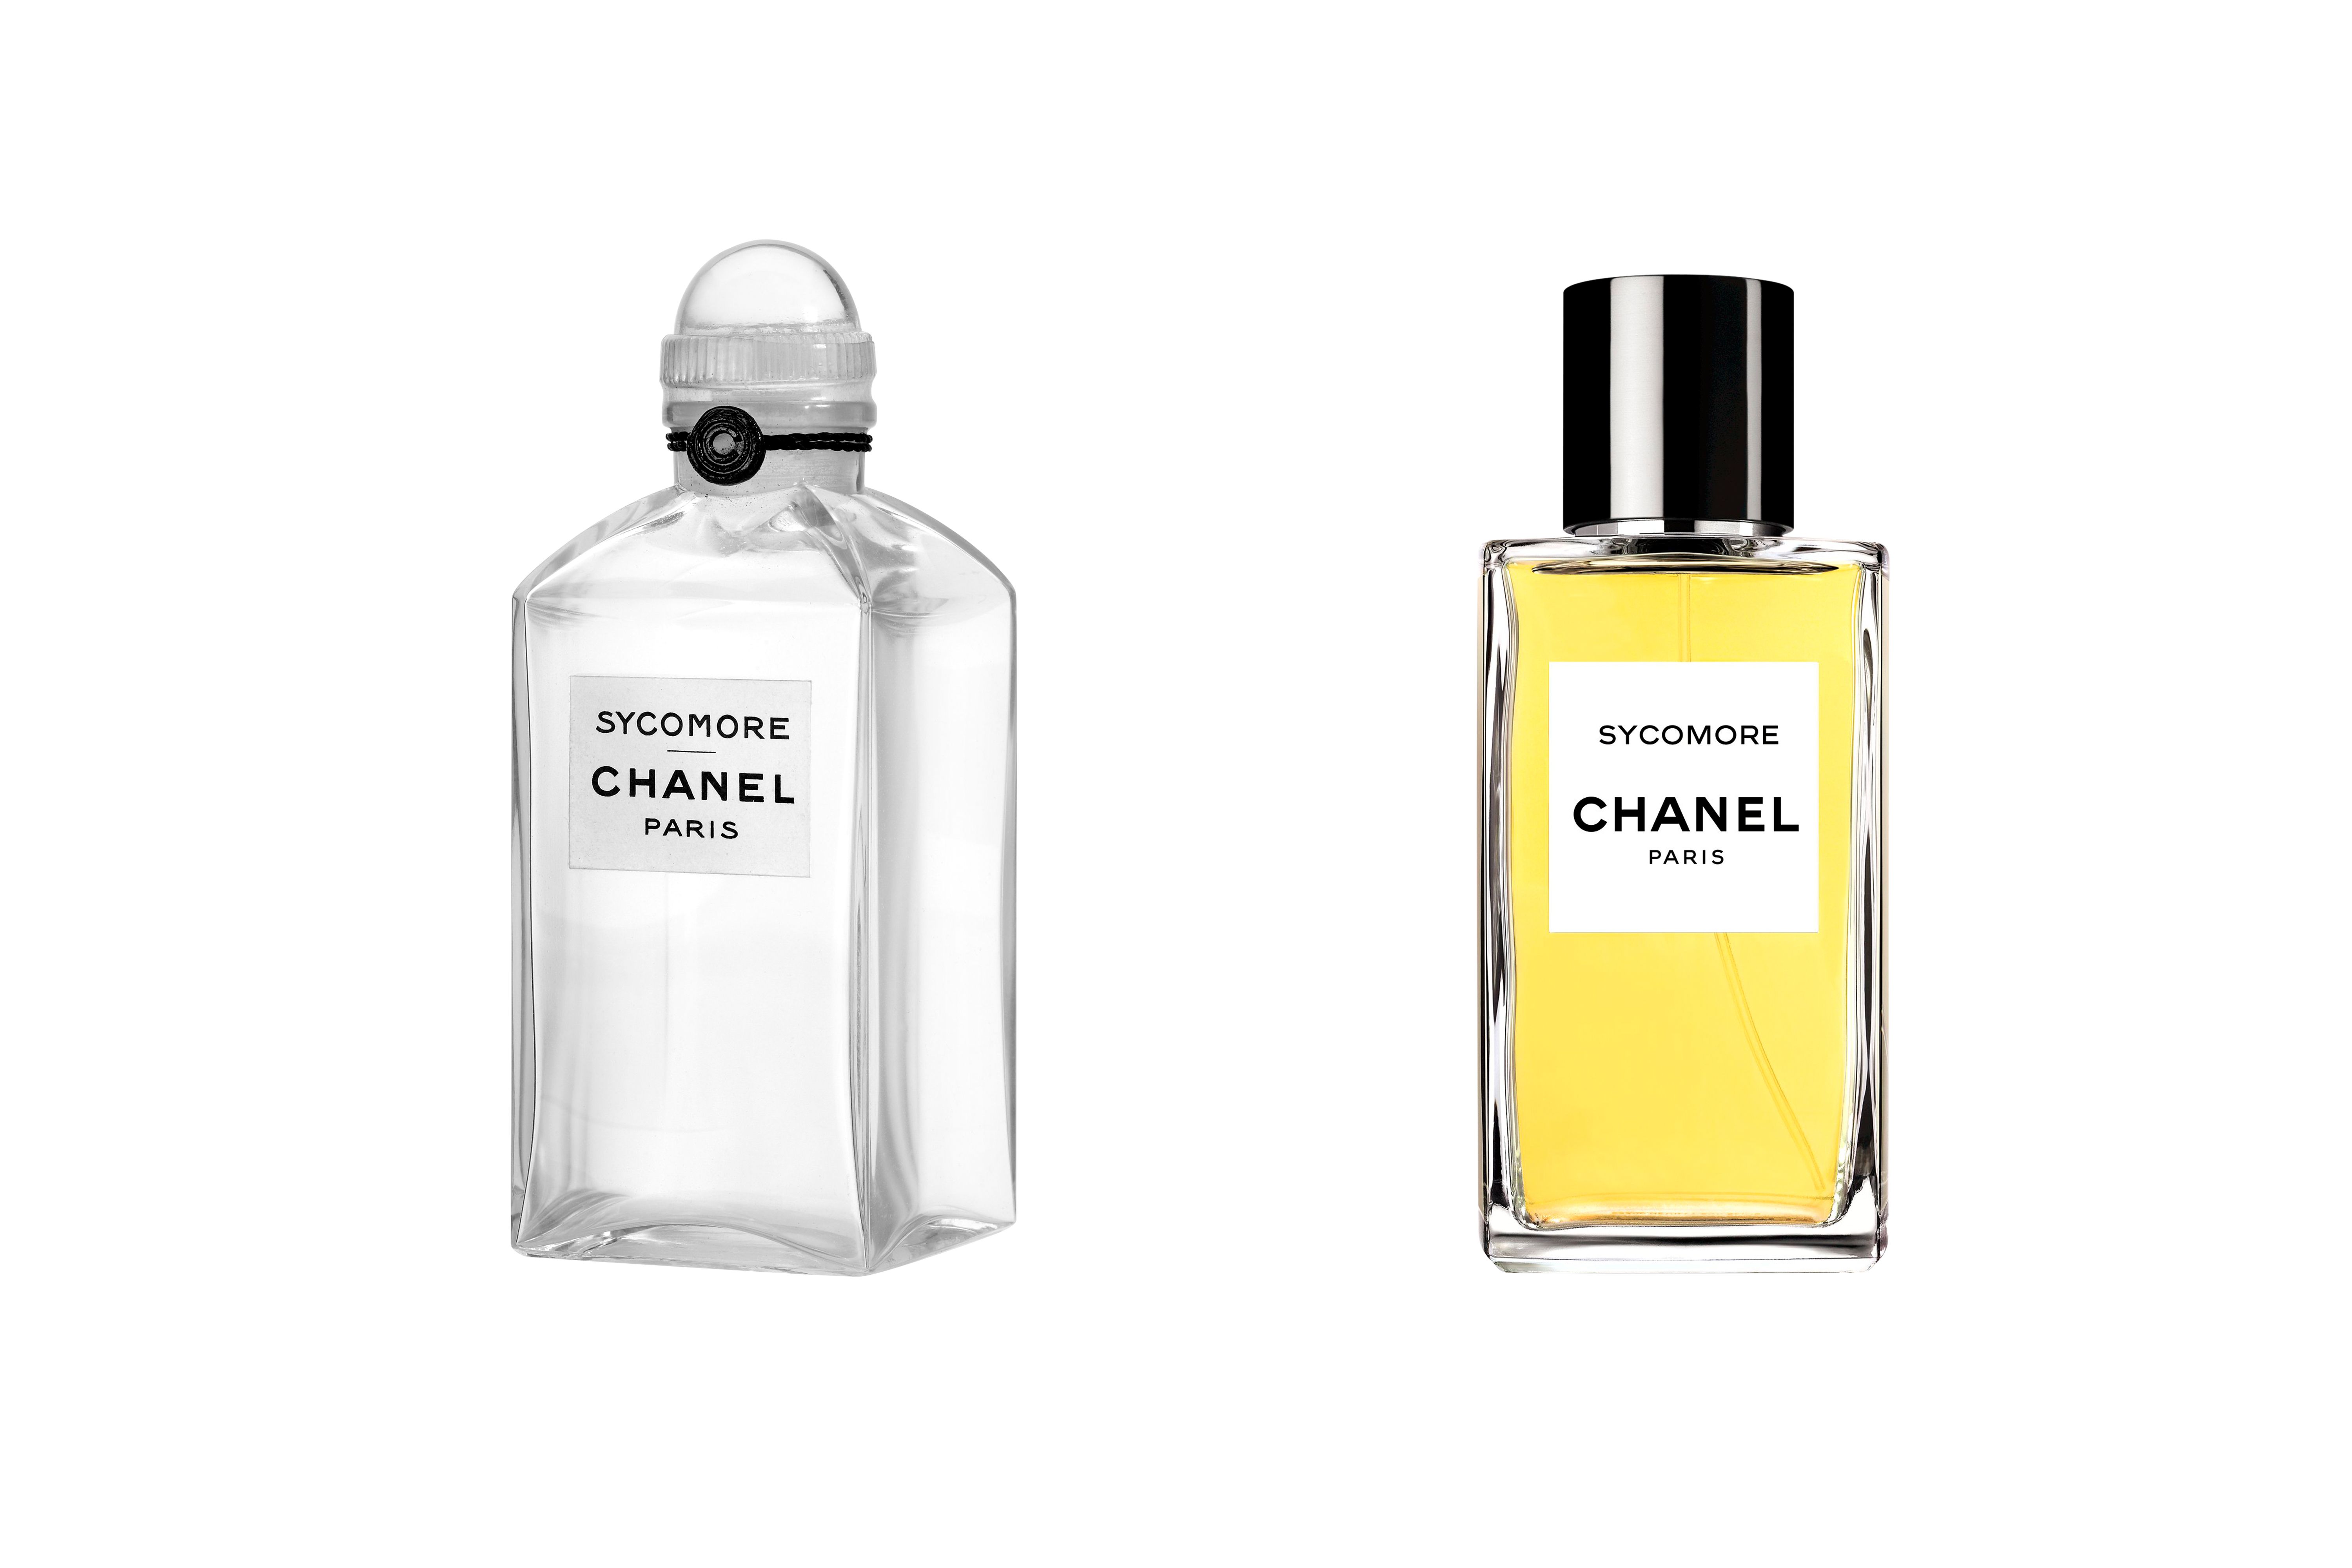 15 DISCONTINUED FRAGRANCES Worth Finding + Buying